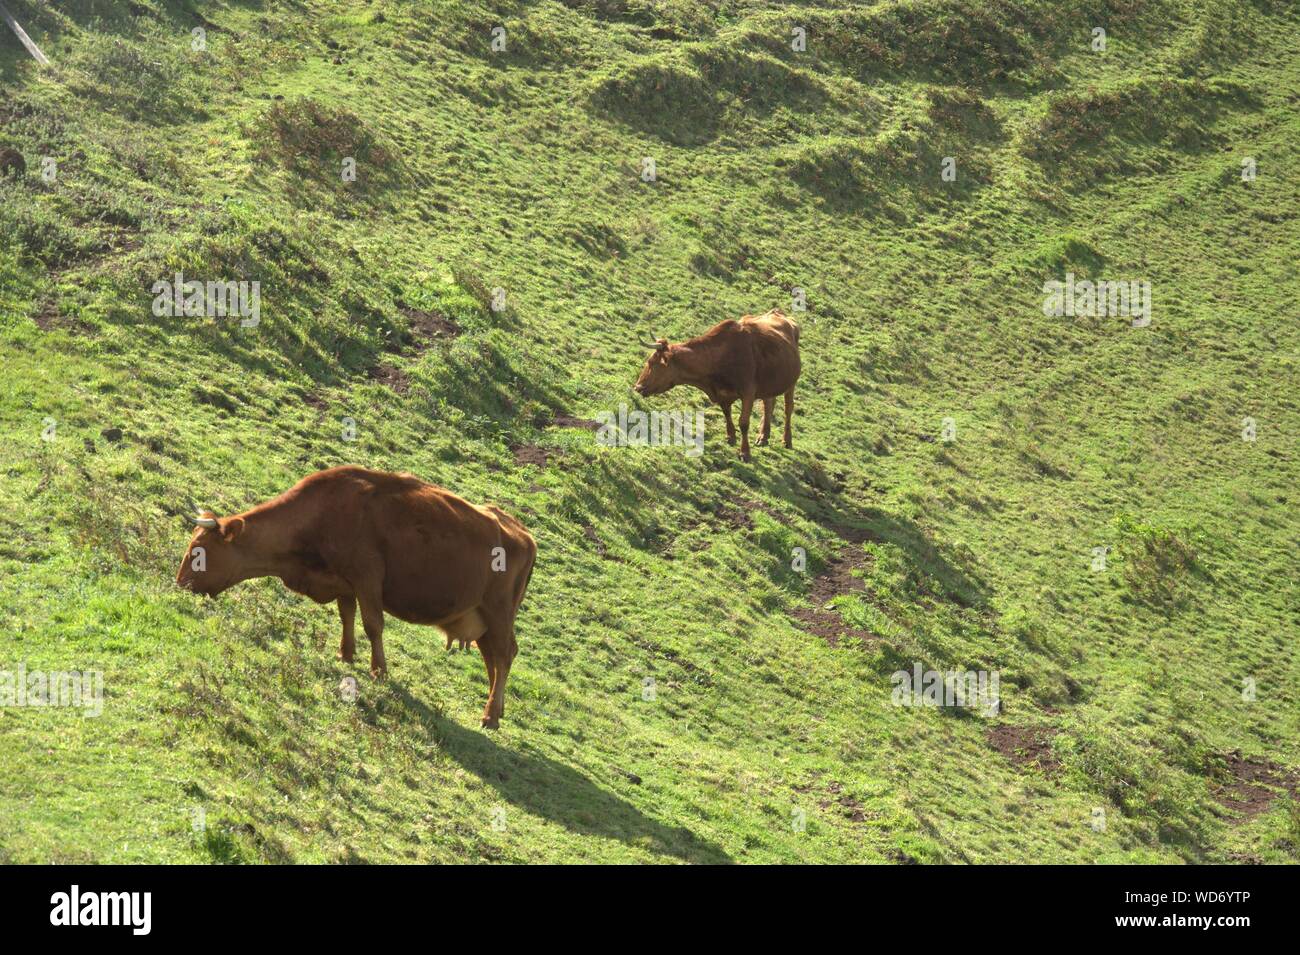 Cows Grazing In A Field Stock Photo